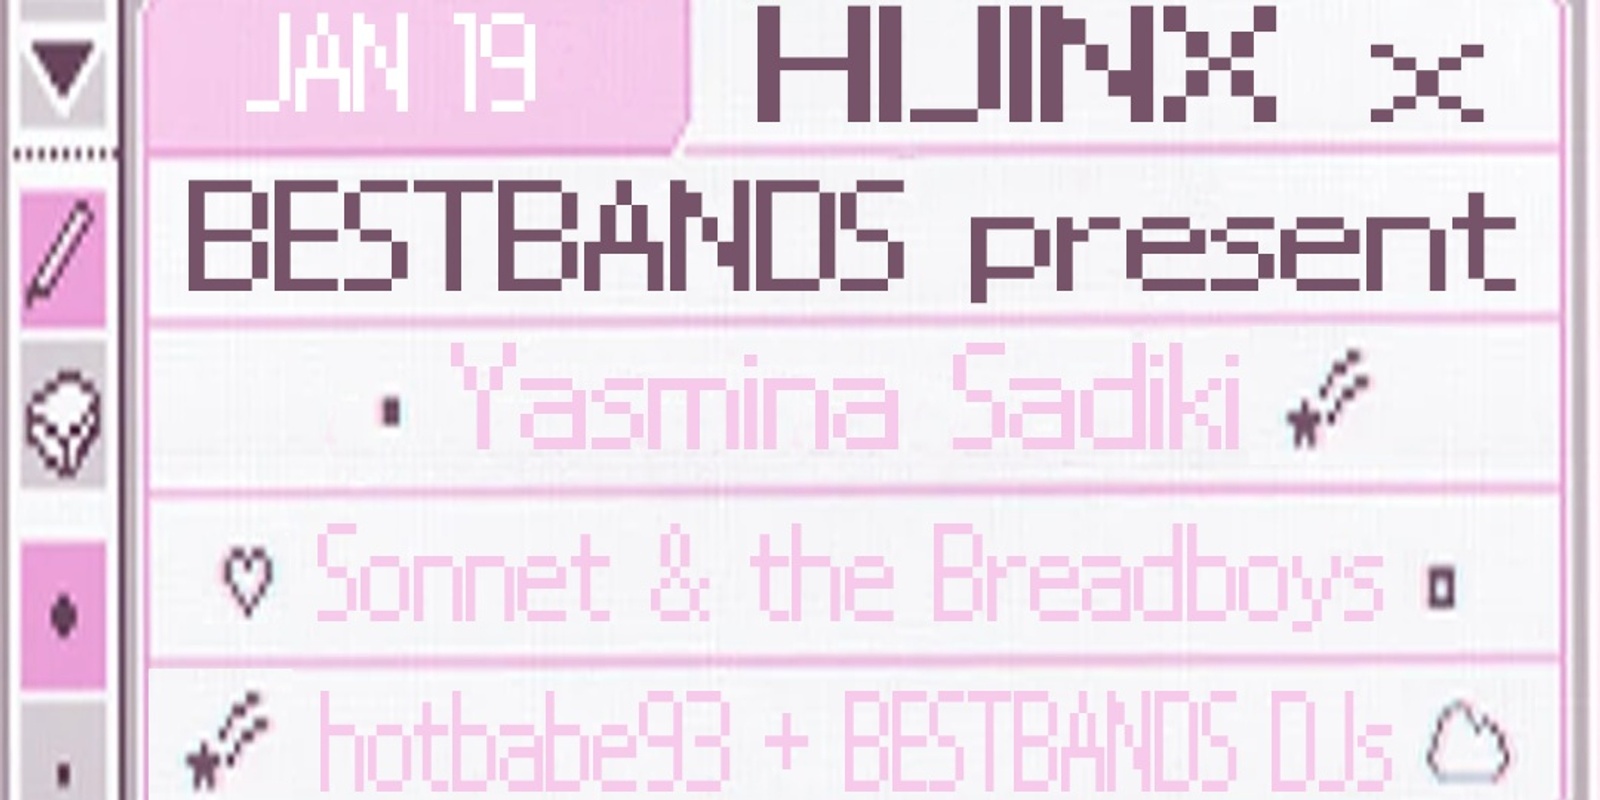 Banner image for HIJINX x BESTBANDS @ The Lord Gladstone January 19 ft. DJs, Stalls & Art